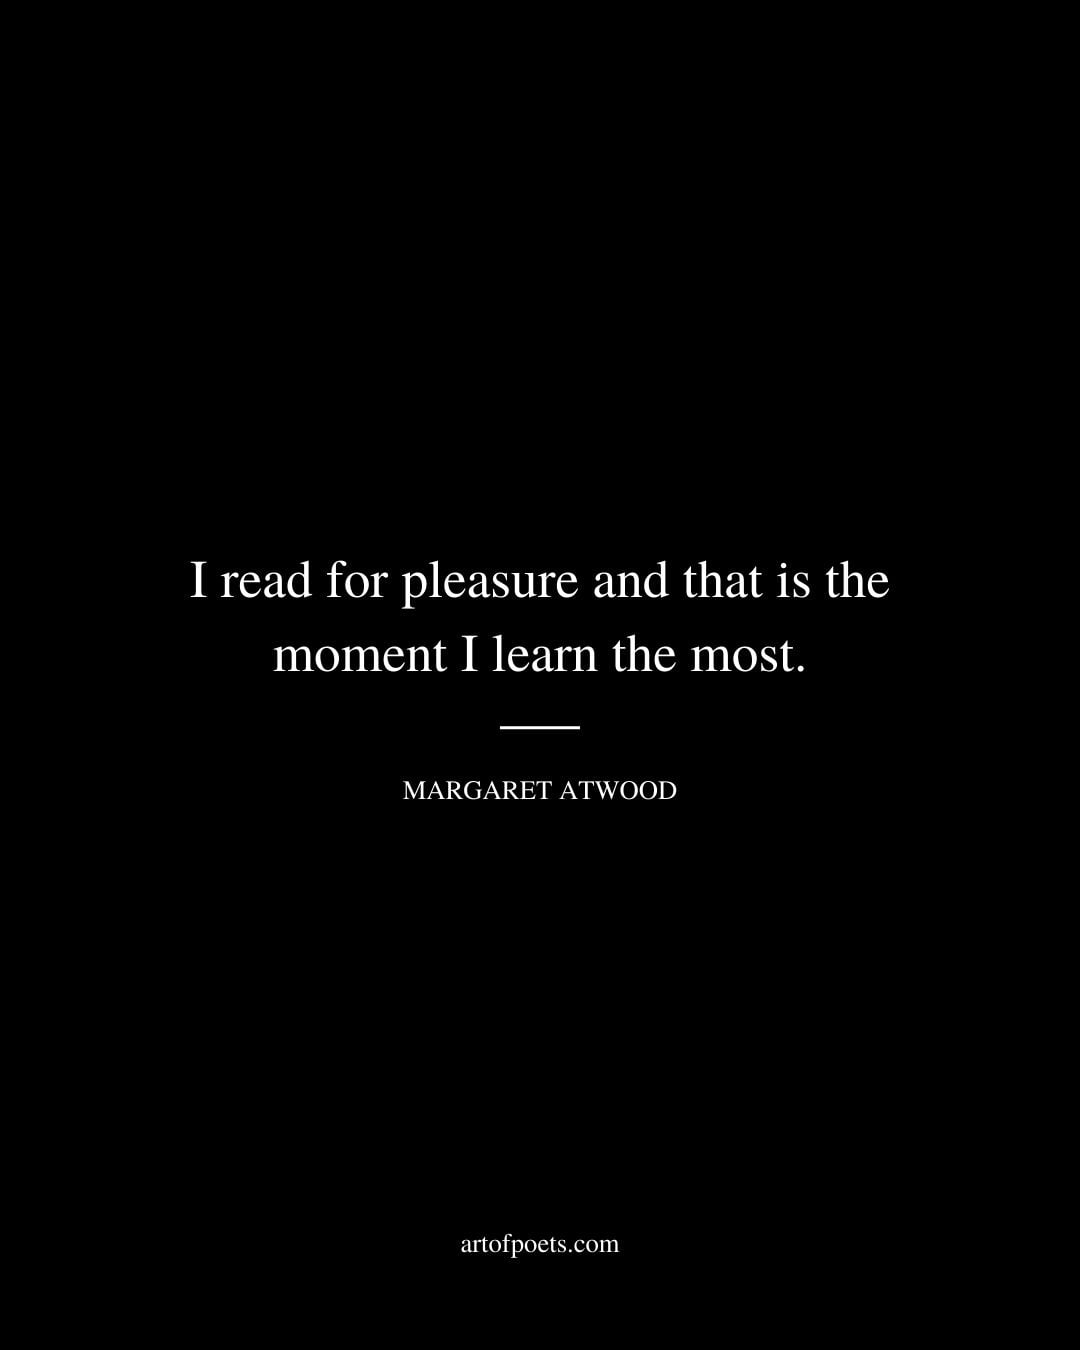 I read for pleasure and that is the moment I learn the most. Margaret Atwood 1